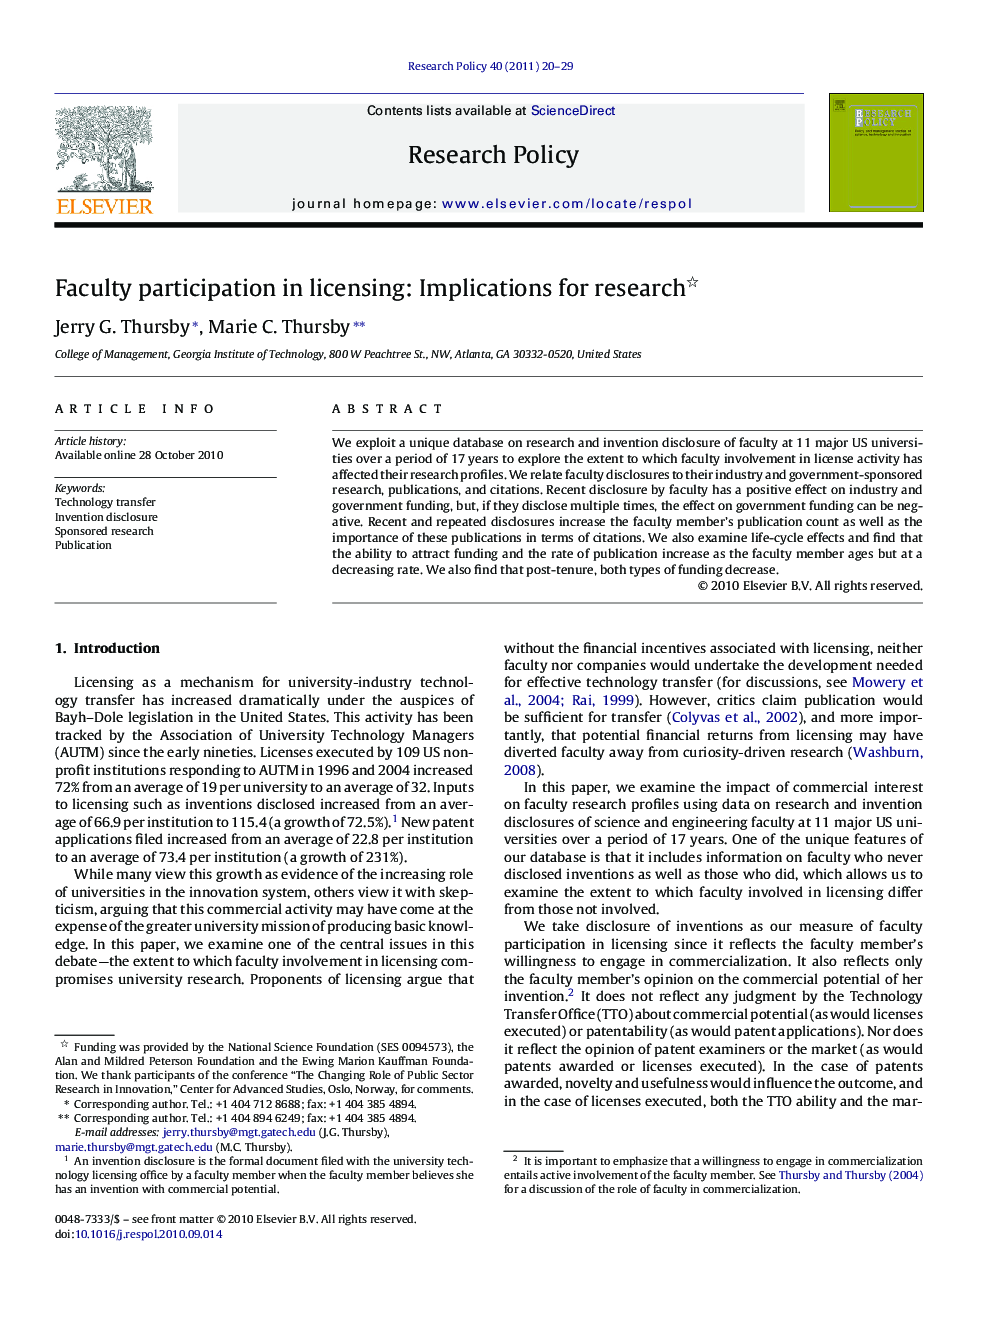 Faculty participation in licensing: Implications for research 